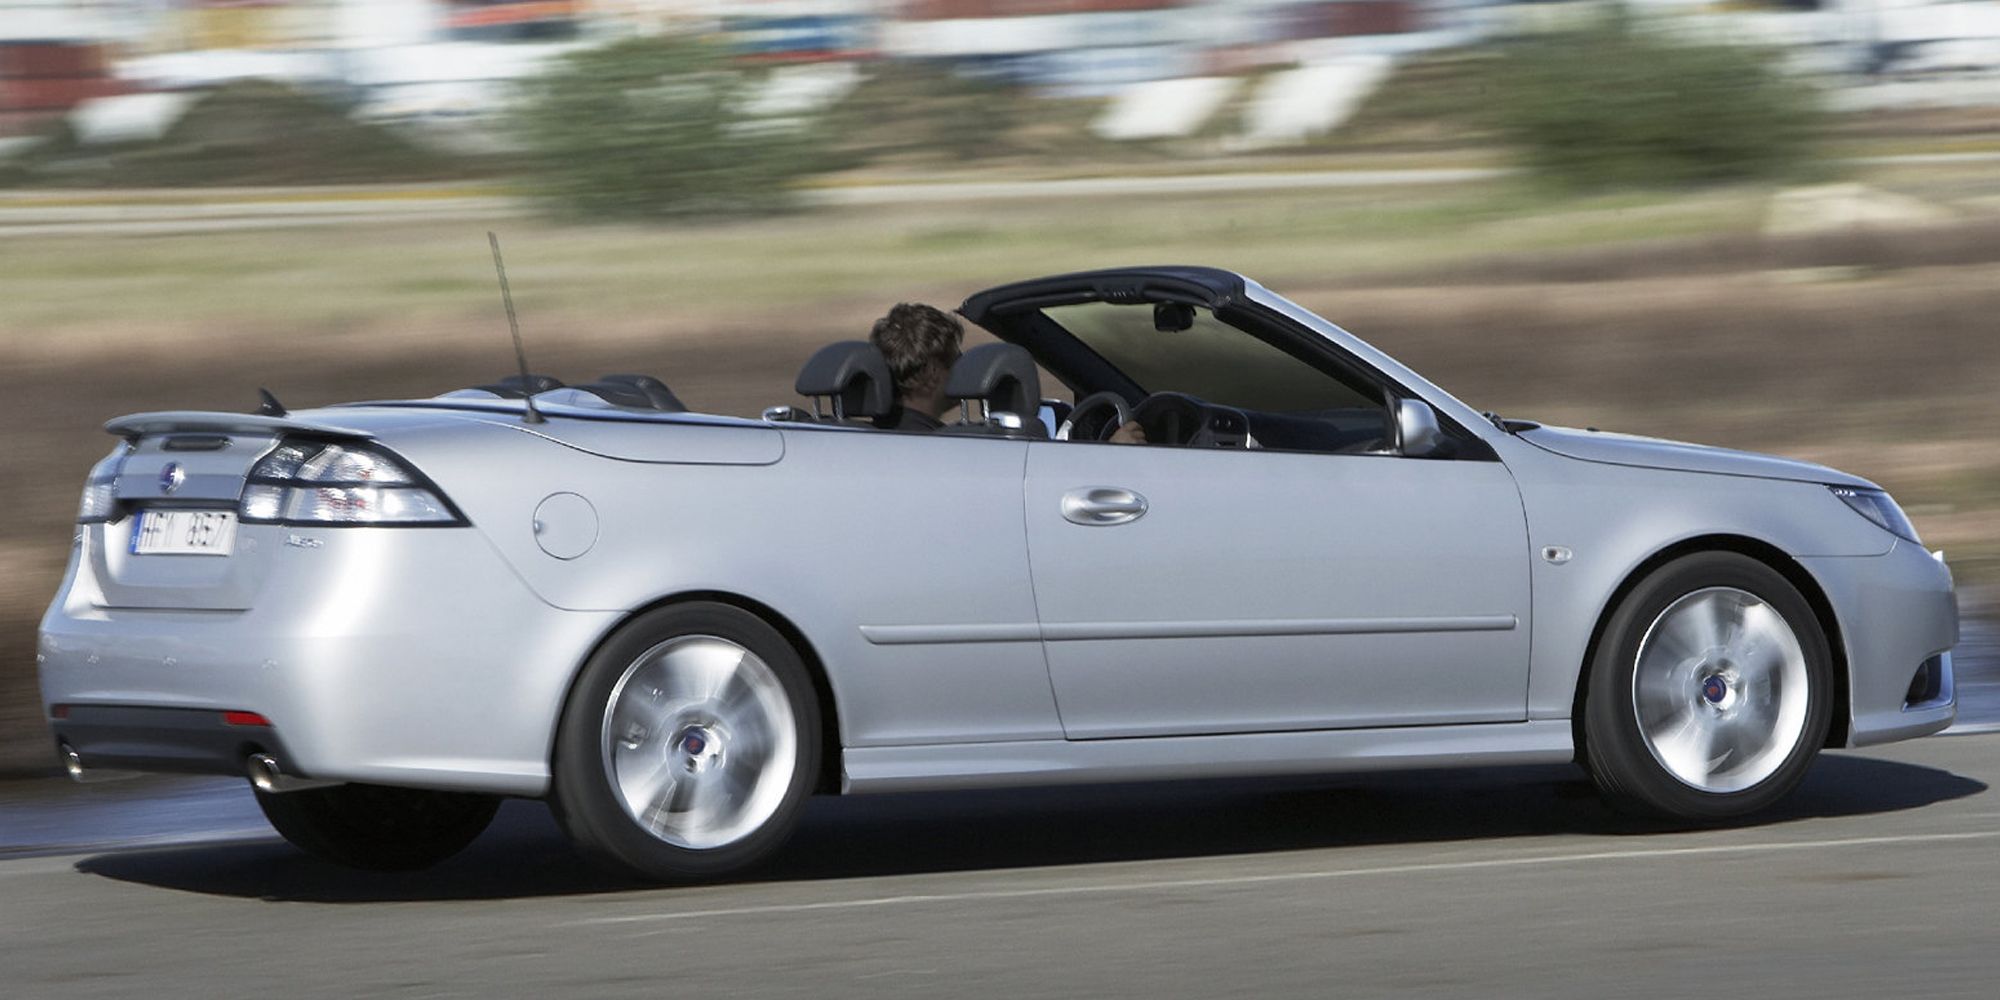 The side of a silver 9-3 Convertible on the move